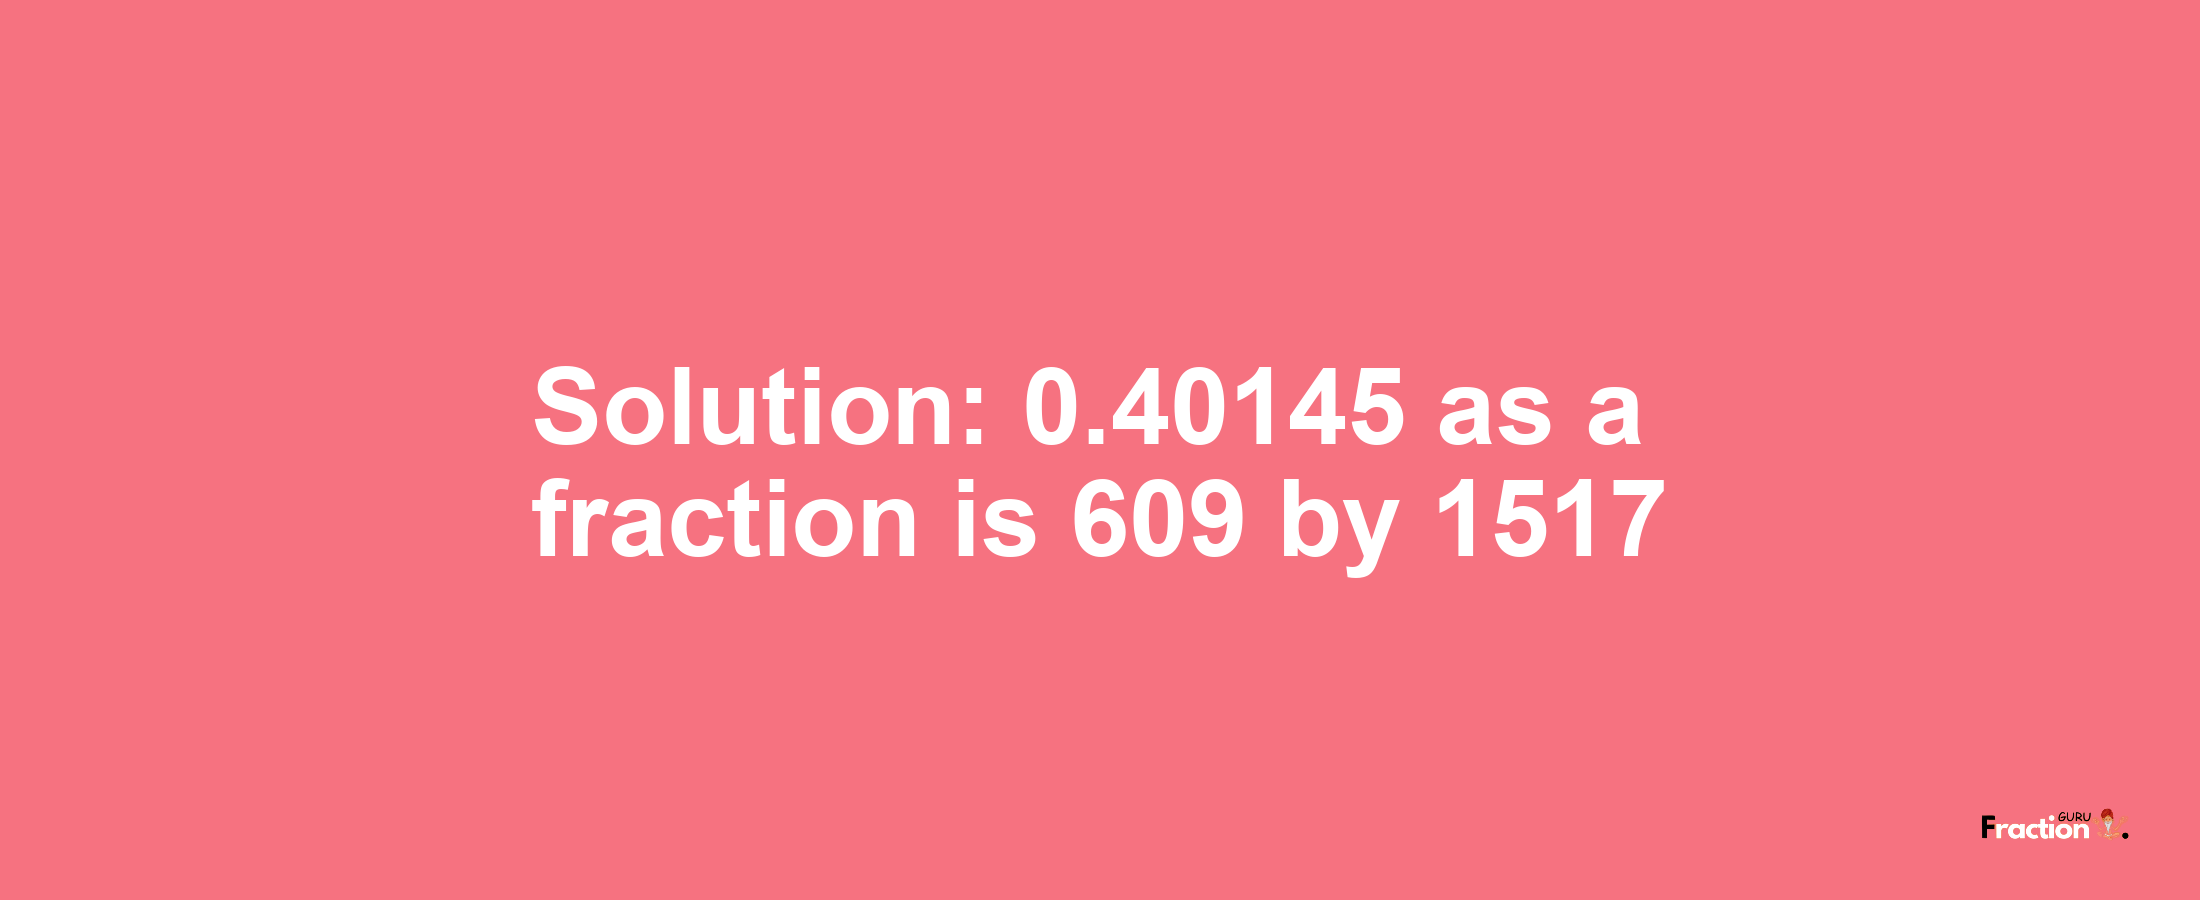 Solution:0.40145 as a fraction is 609/1517